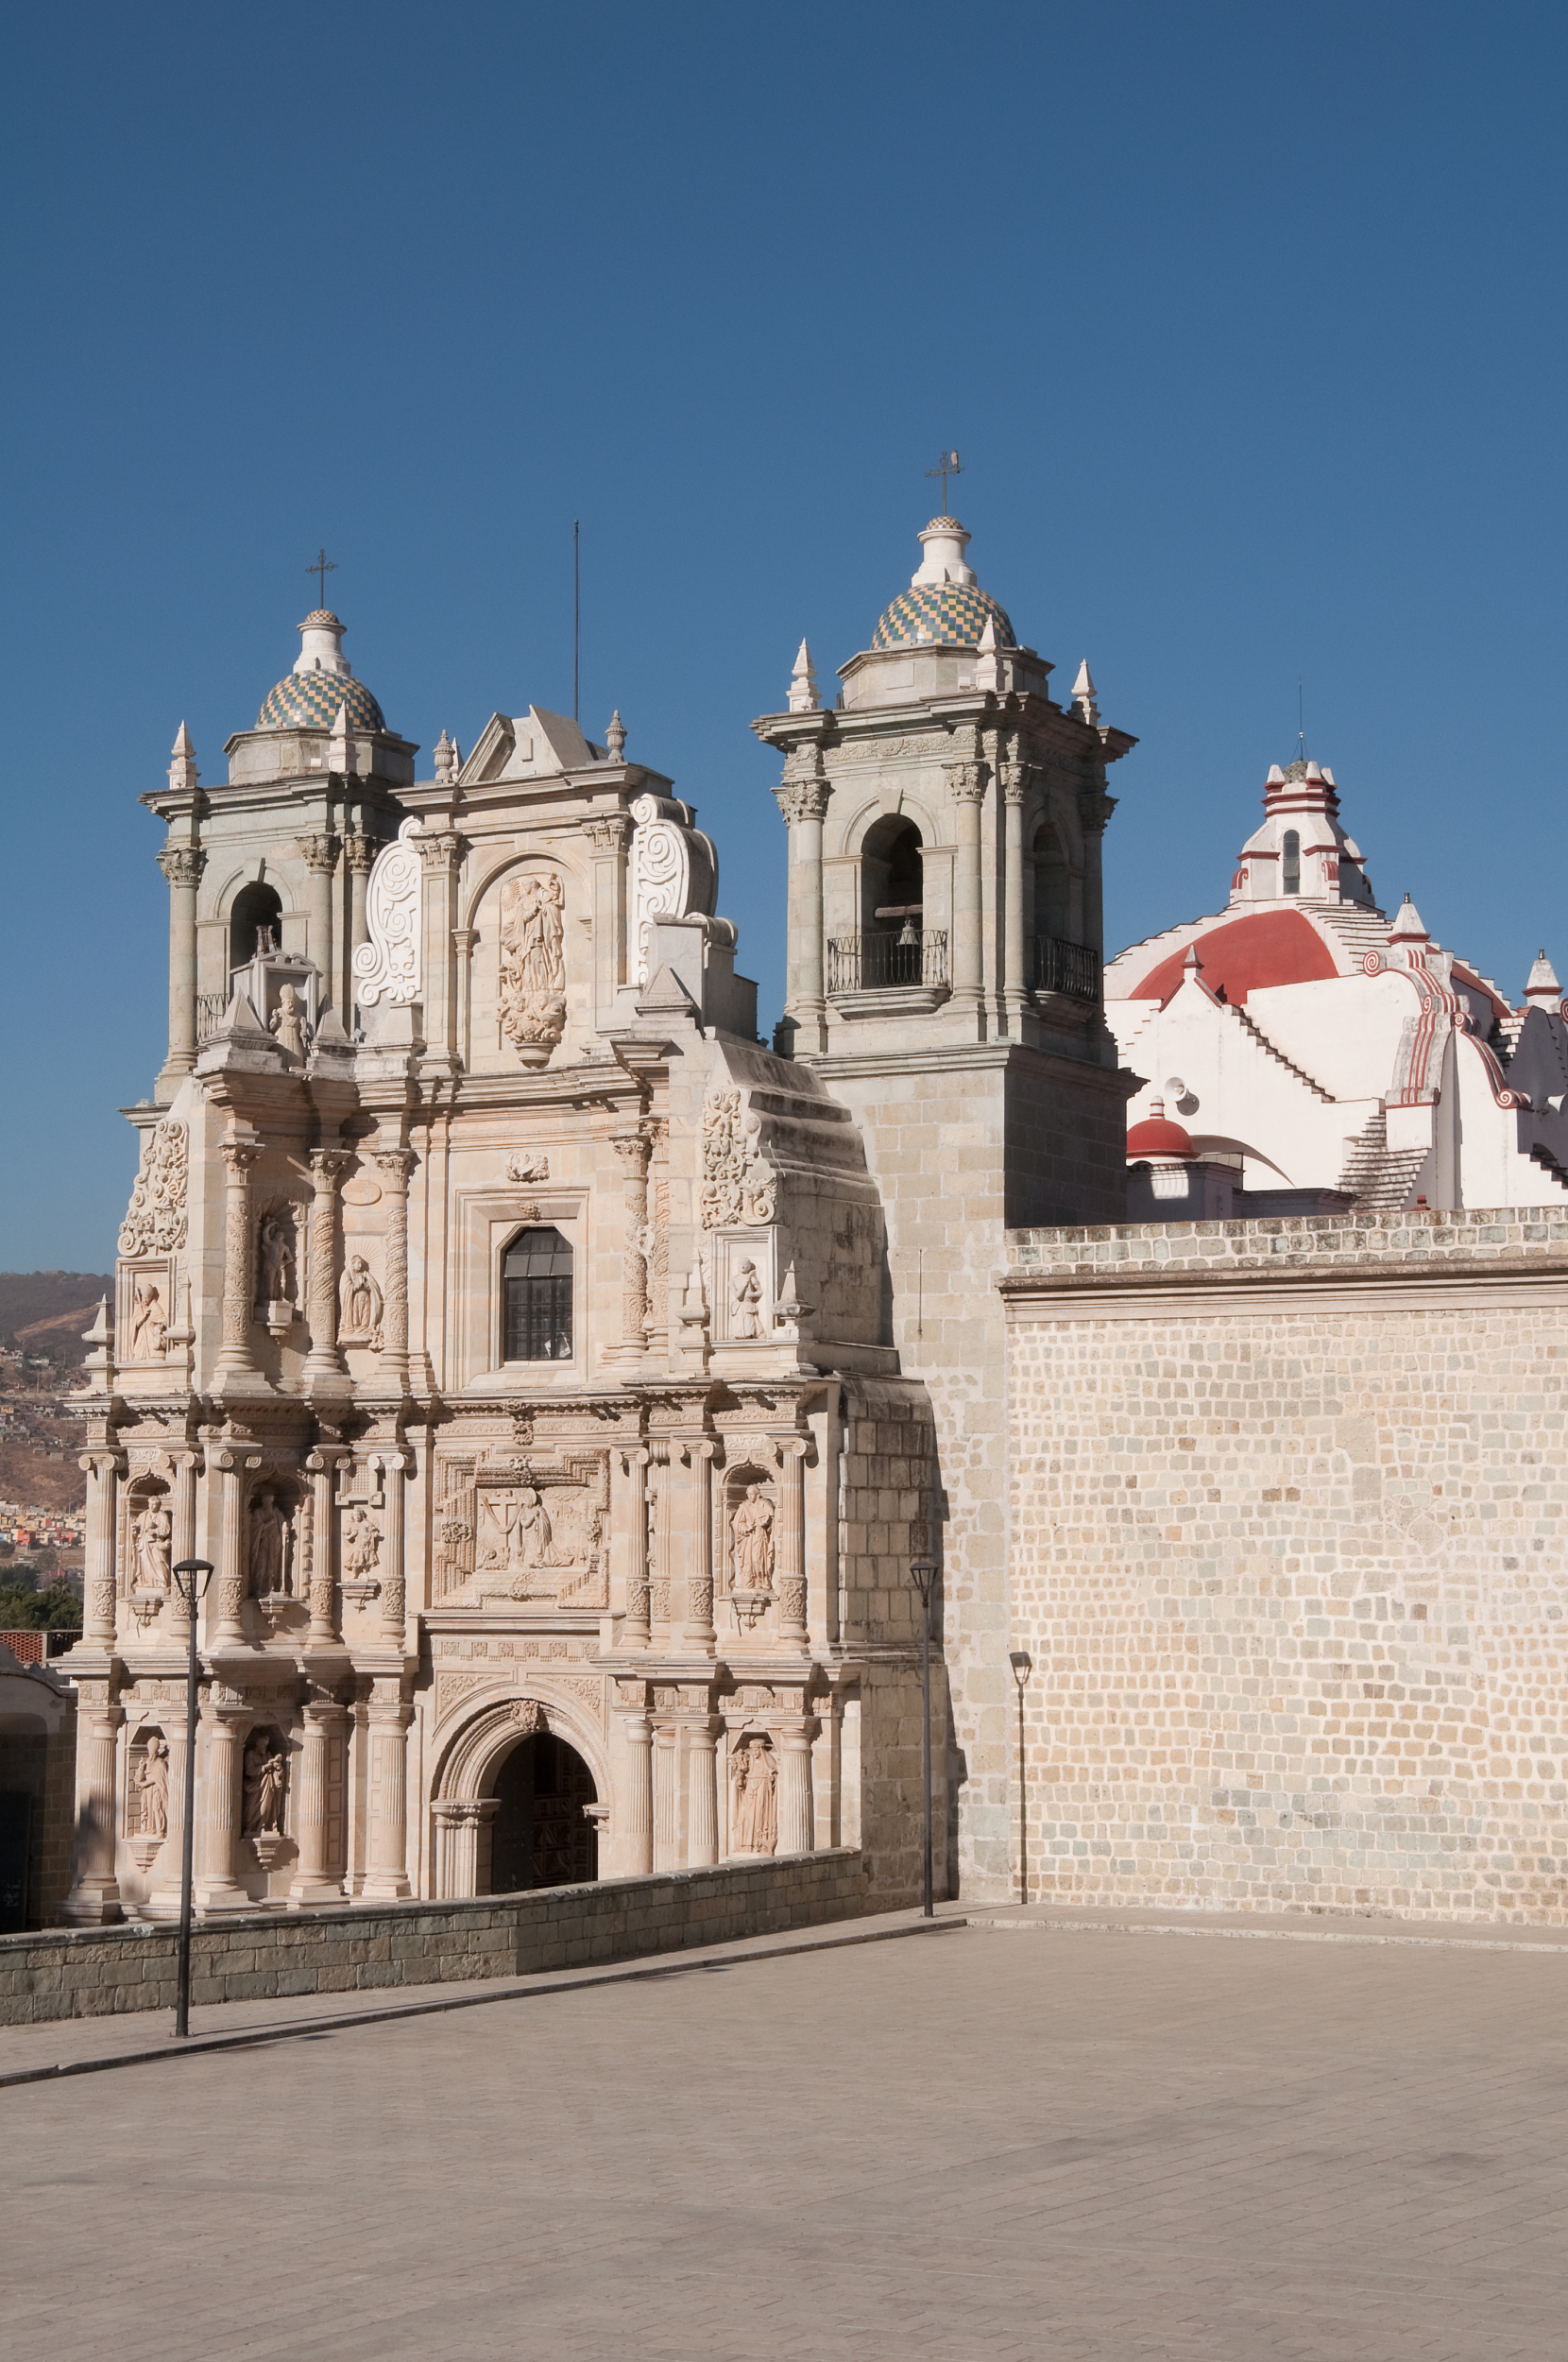 Basilica de la Soledad attraction reviews - Basilica de la Soledad tickets  - Basilica de la Soledad discounts - Basilica de la Soledad transportation,  address, opening hours - attractions, hotels, and food